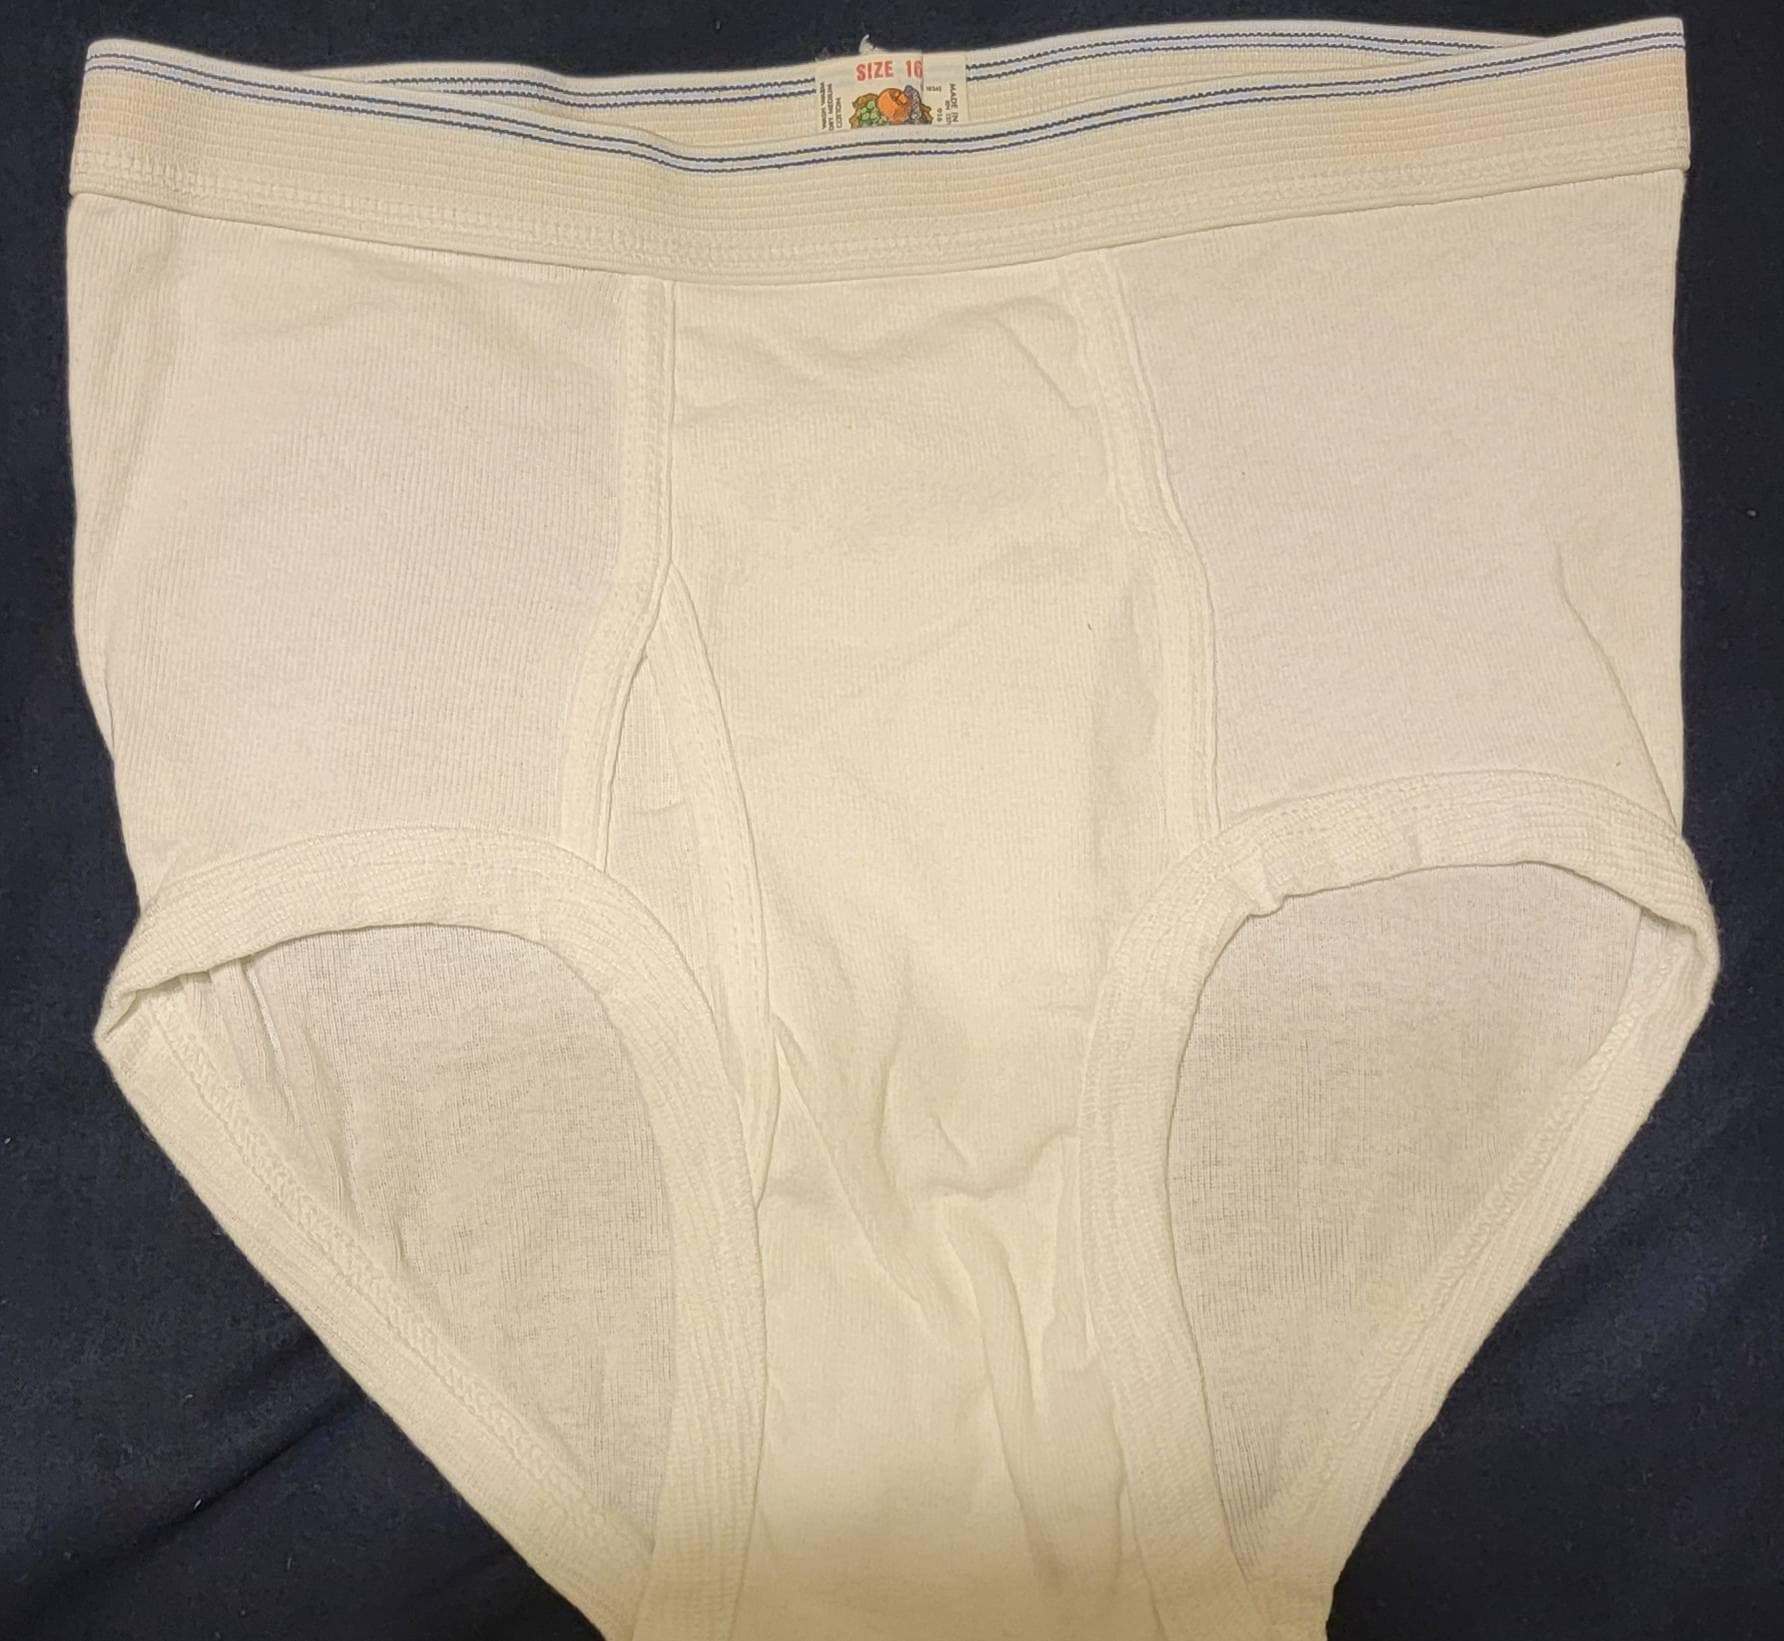 90's Vintage Fruit of the Loom Briefs SIZE 14,16 